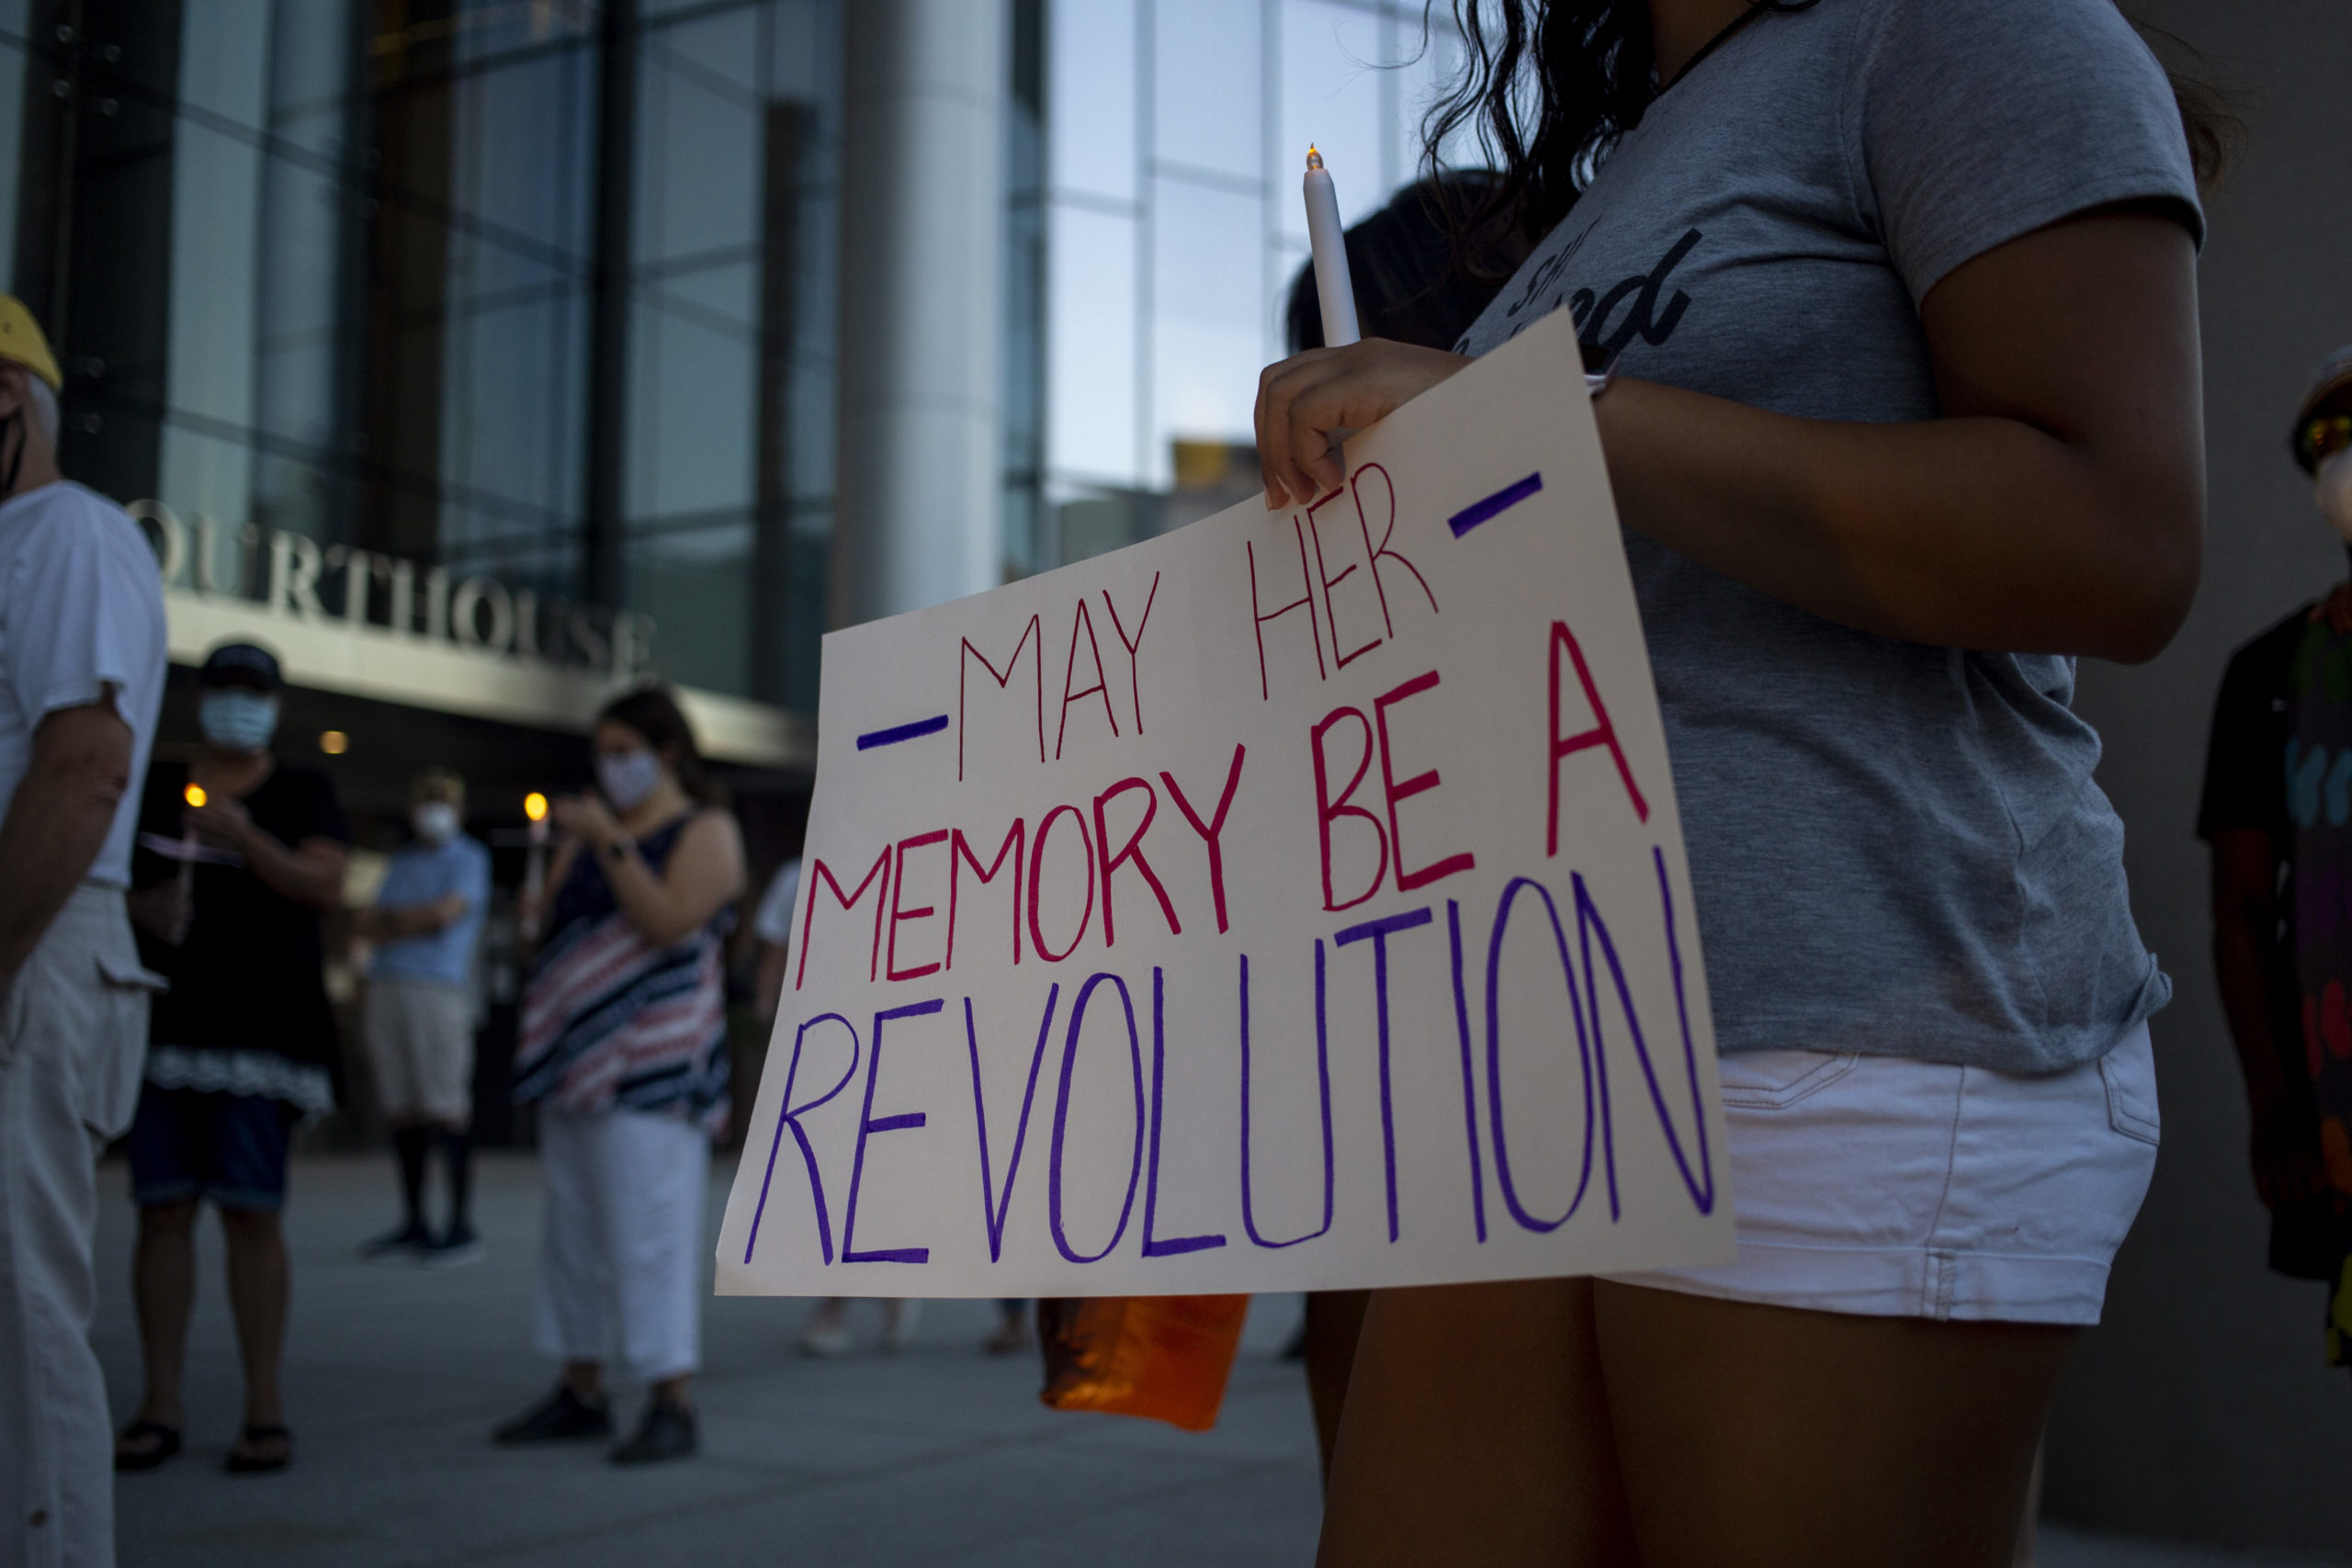 A woman holds a sign that reads "May her memory be a revolution"